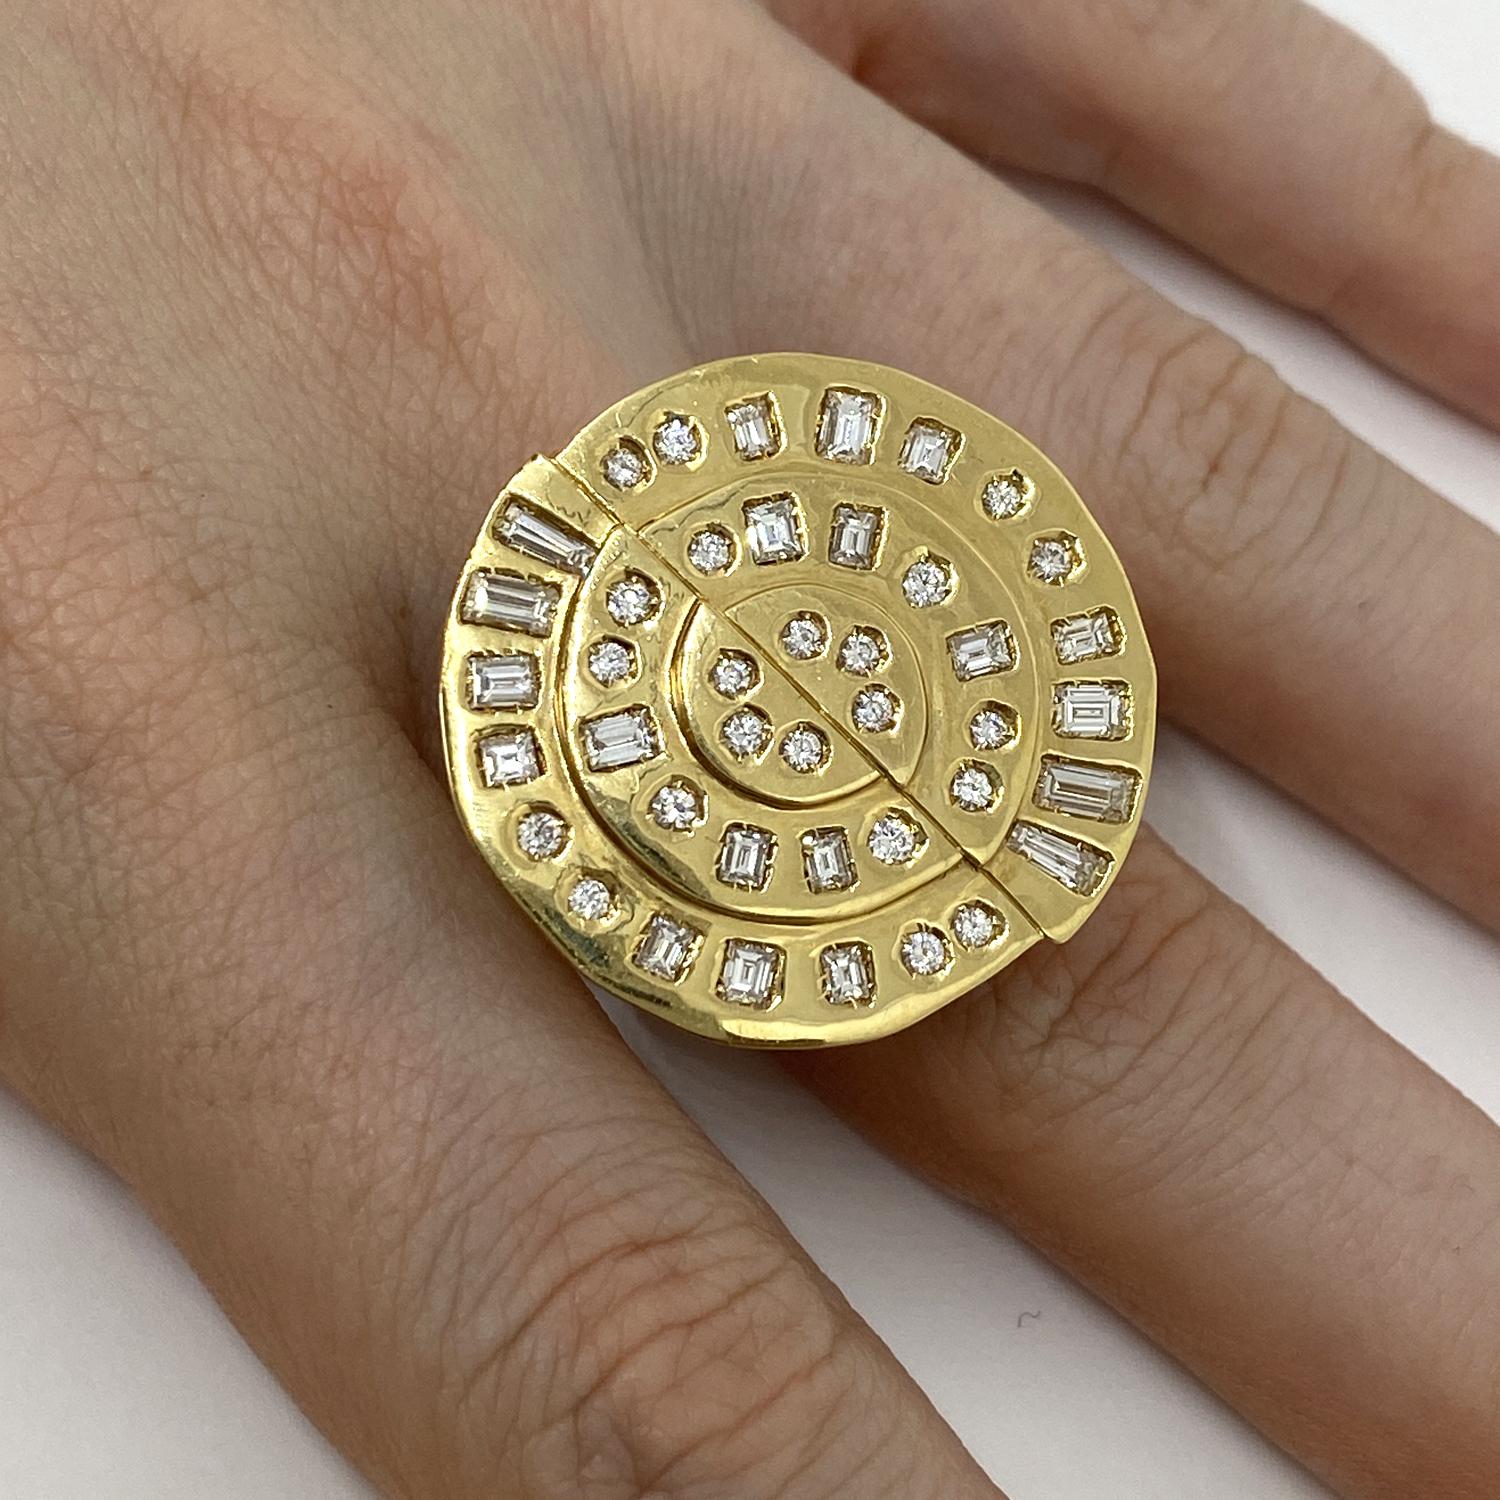 Transformable pendant ring made of 18kt yellow gold with baguette-cut white diamonds for ct.5.90
-------------------------------------------------

Important Note : In order to speed up the publishing process of our vast inventory, this jewelry only